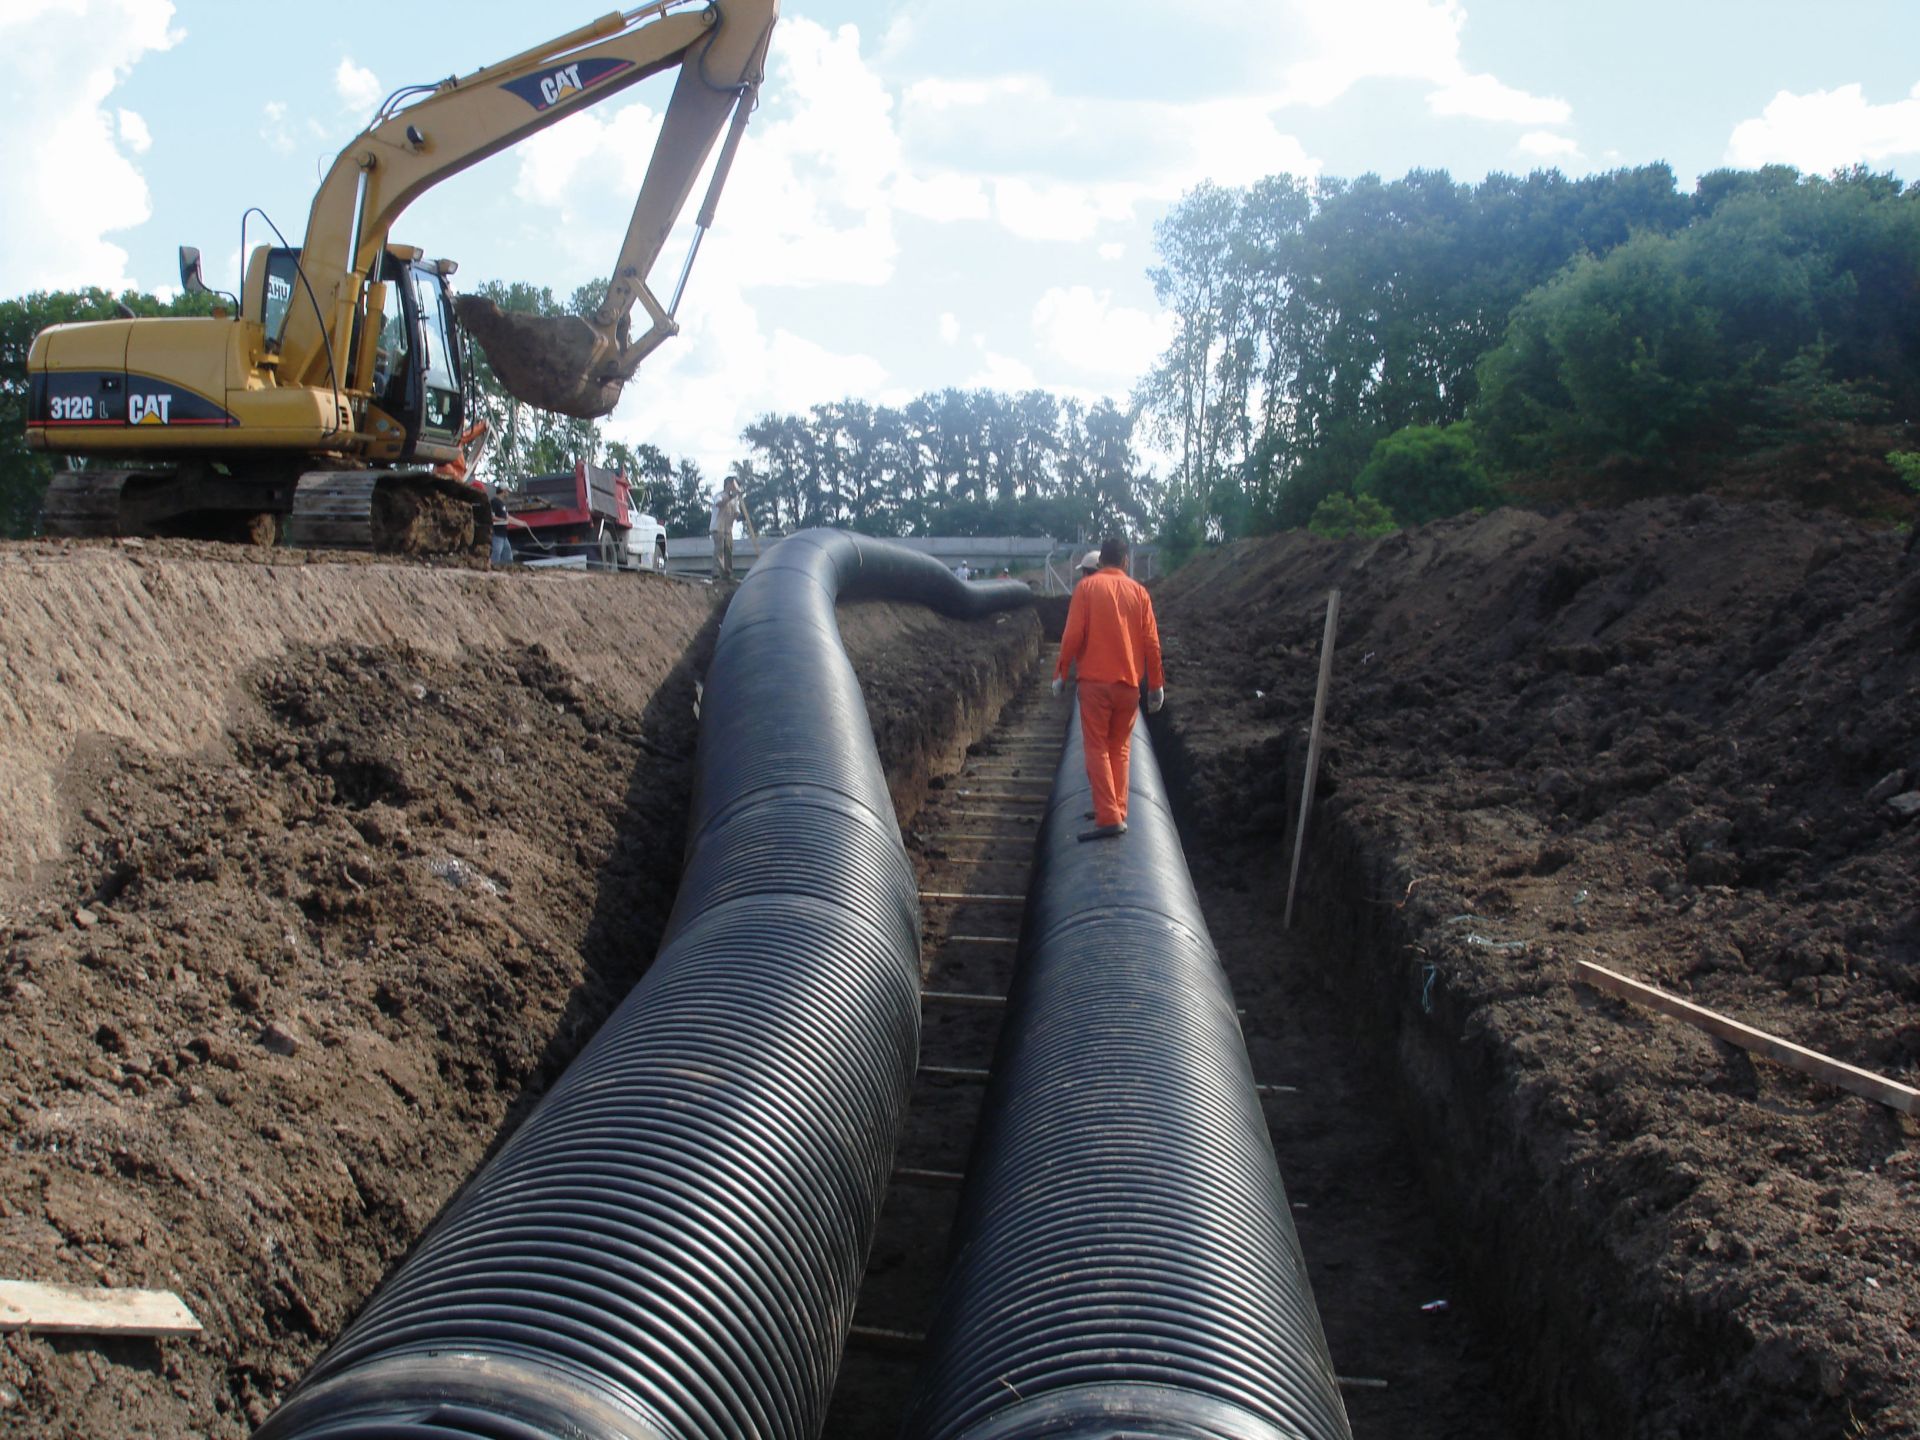 Short-term bending conditions, the welding was done  outside and now the pipe is moved into the trench DN/ID 1200 mm